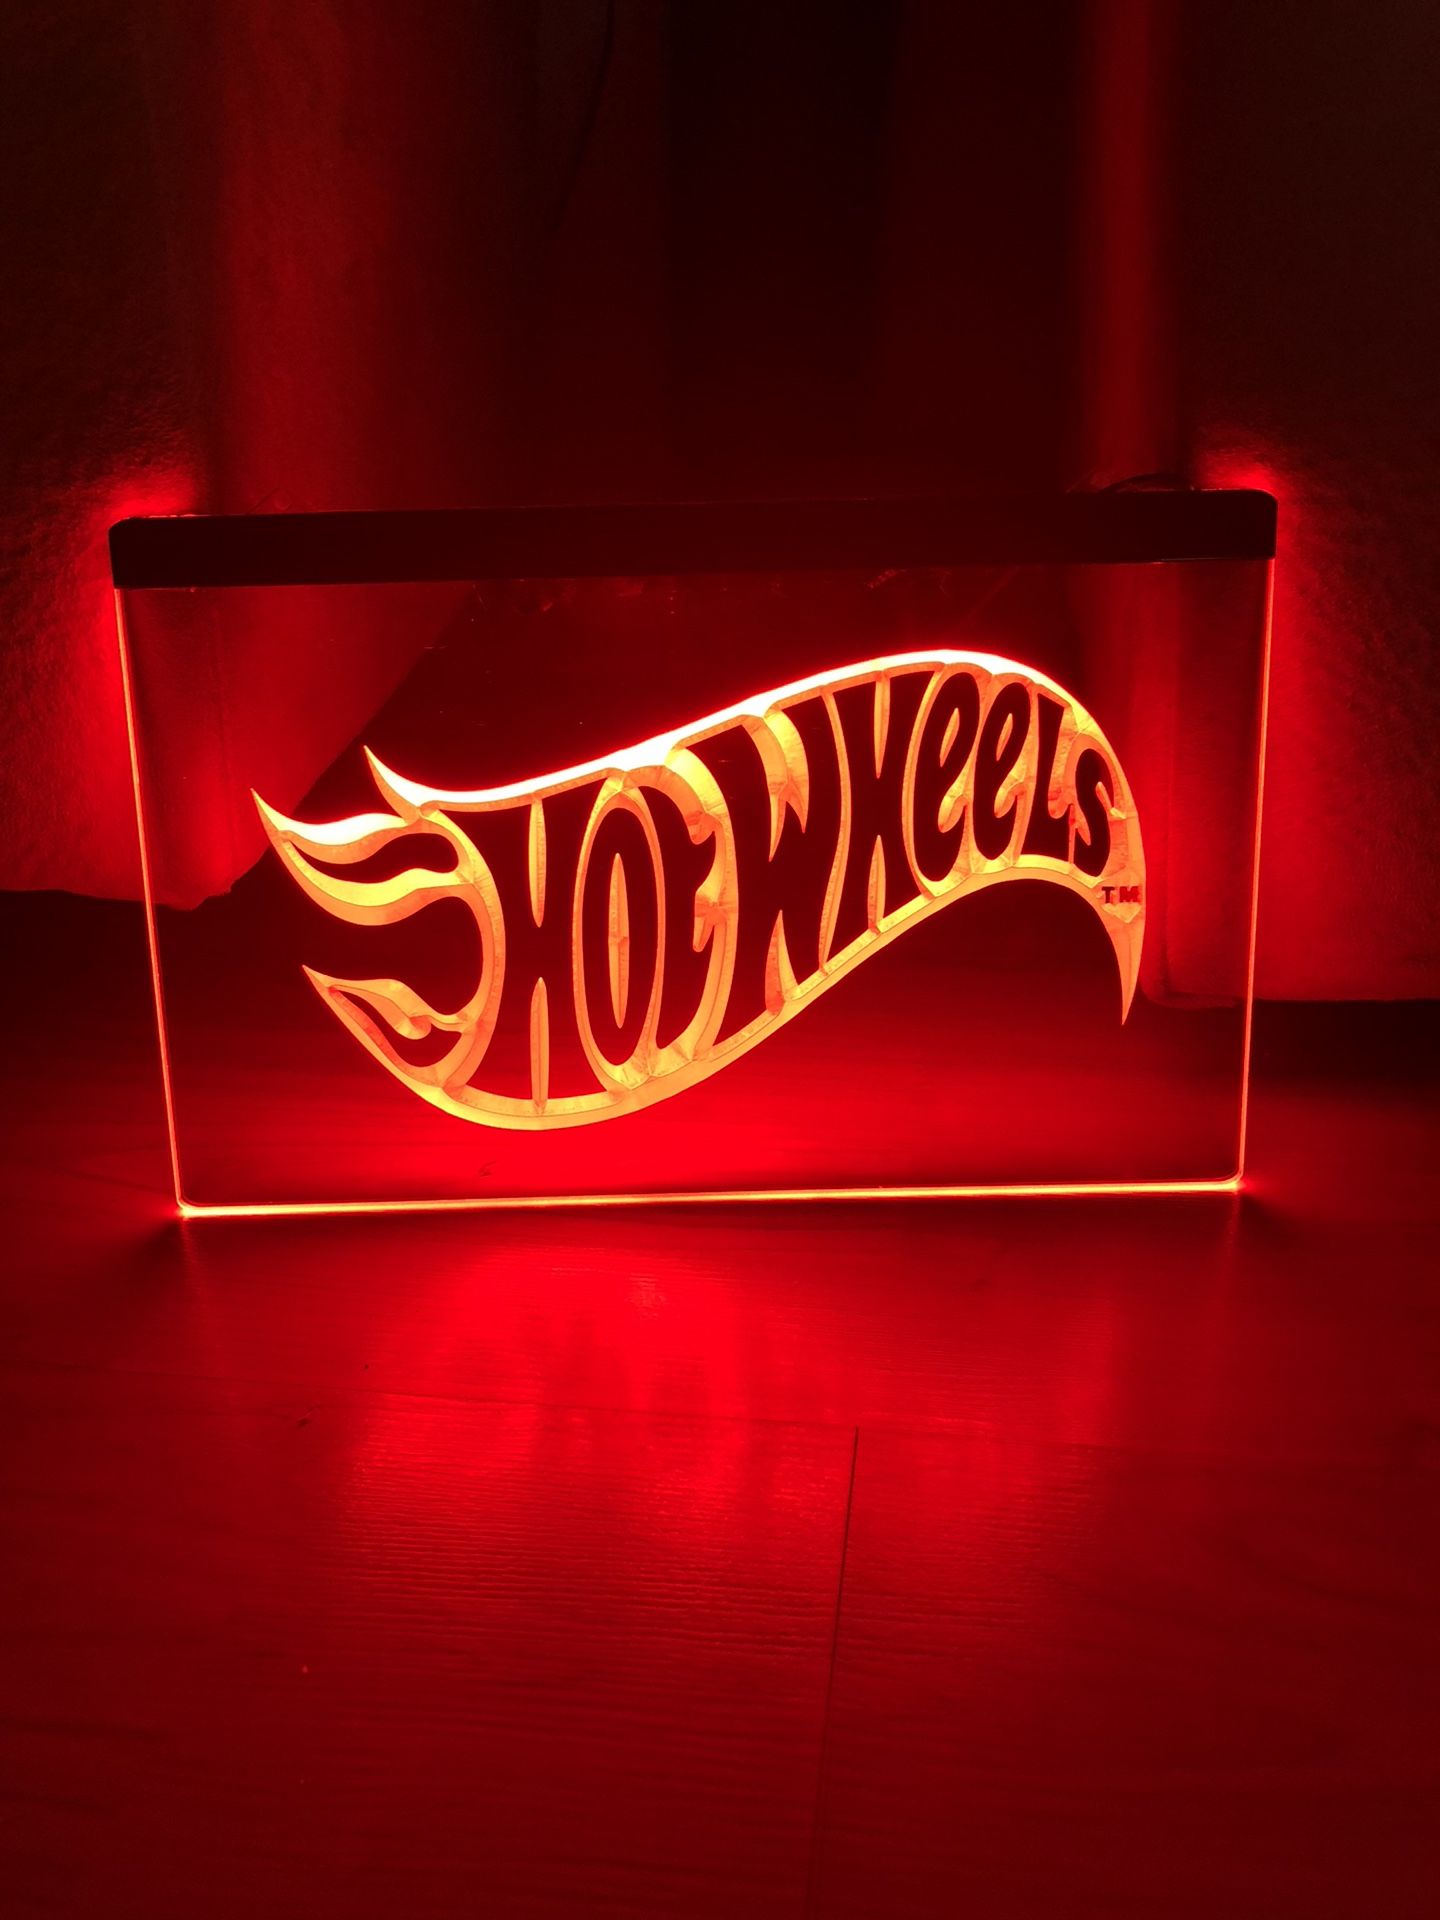 HOT WHEELS LED NEON RED LIGHT SIGN 8x12